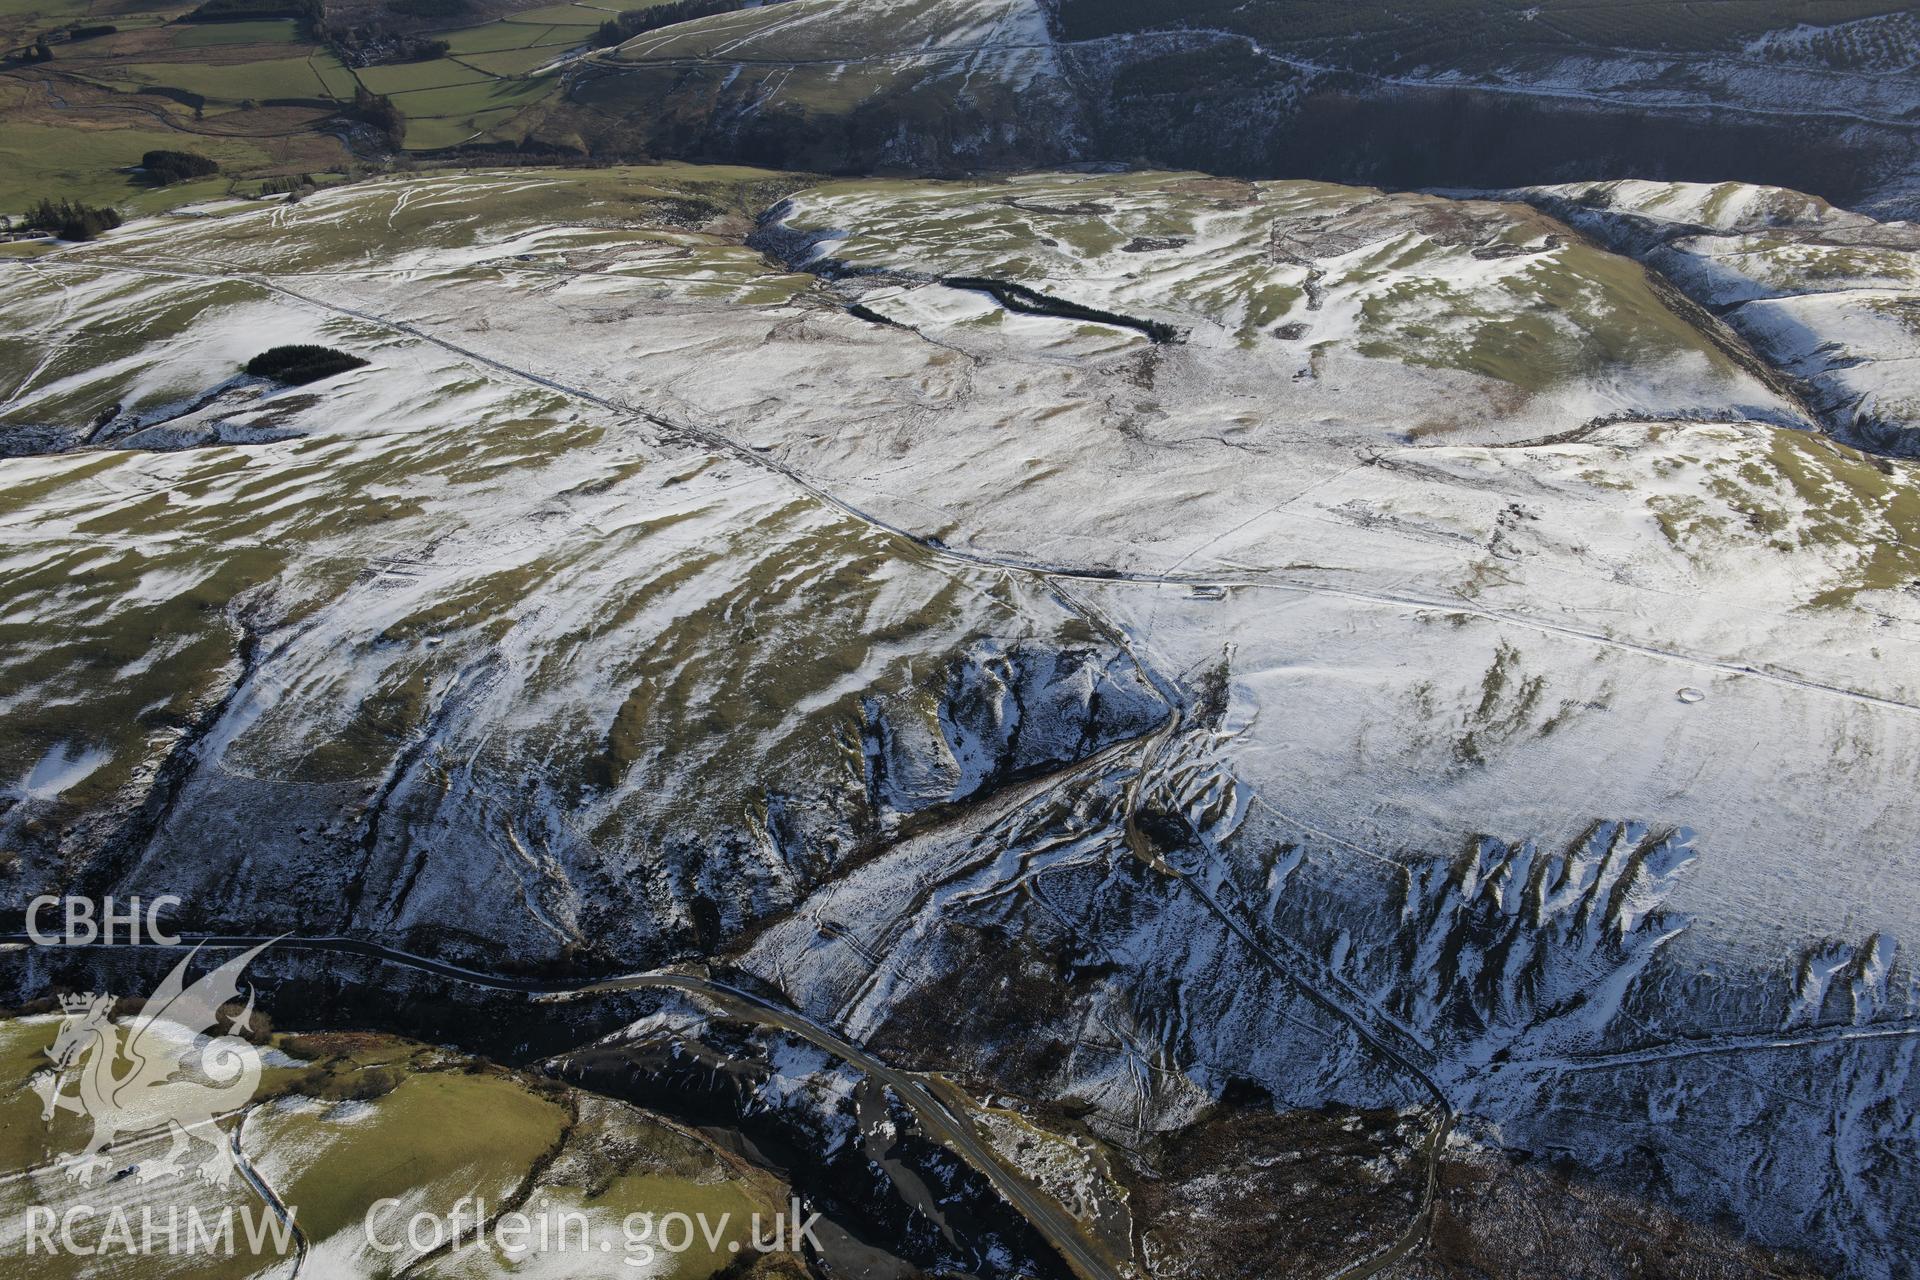 Area of apparent hushing features north east of Penycrocbren, south of Dylife, near Machynlleth. Oblique aerial photograph taken during the Royal Commission's programme of archaeological aerial reconnaissance by Toby Driver on 4th February 2015.